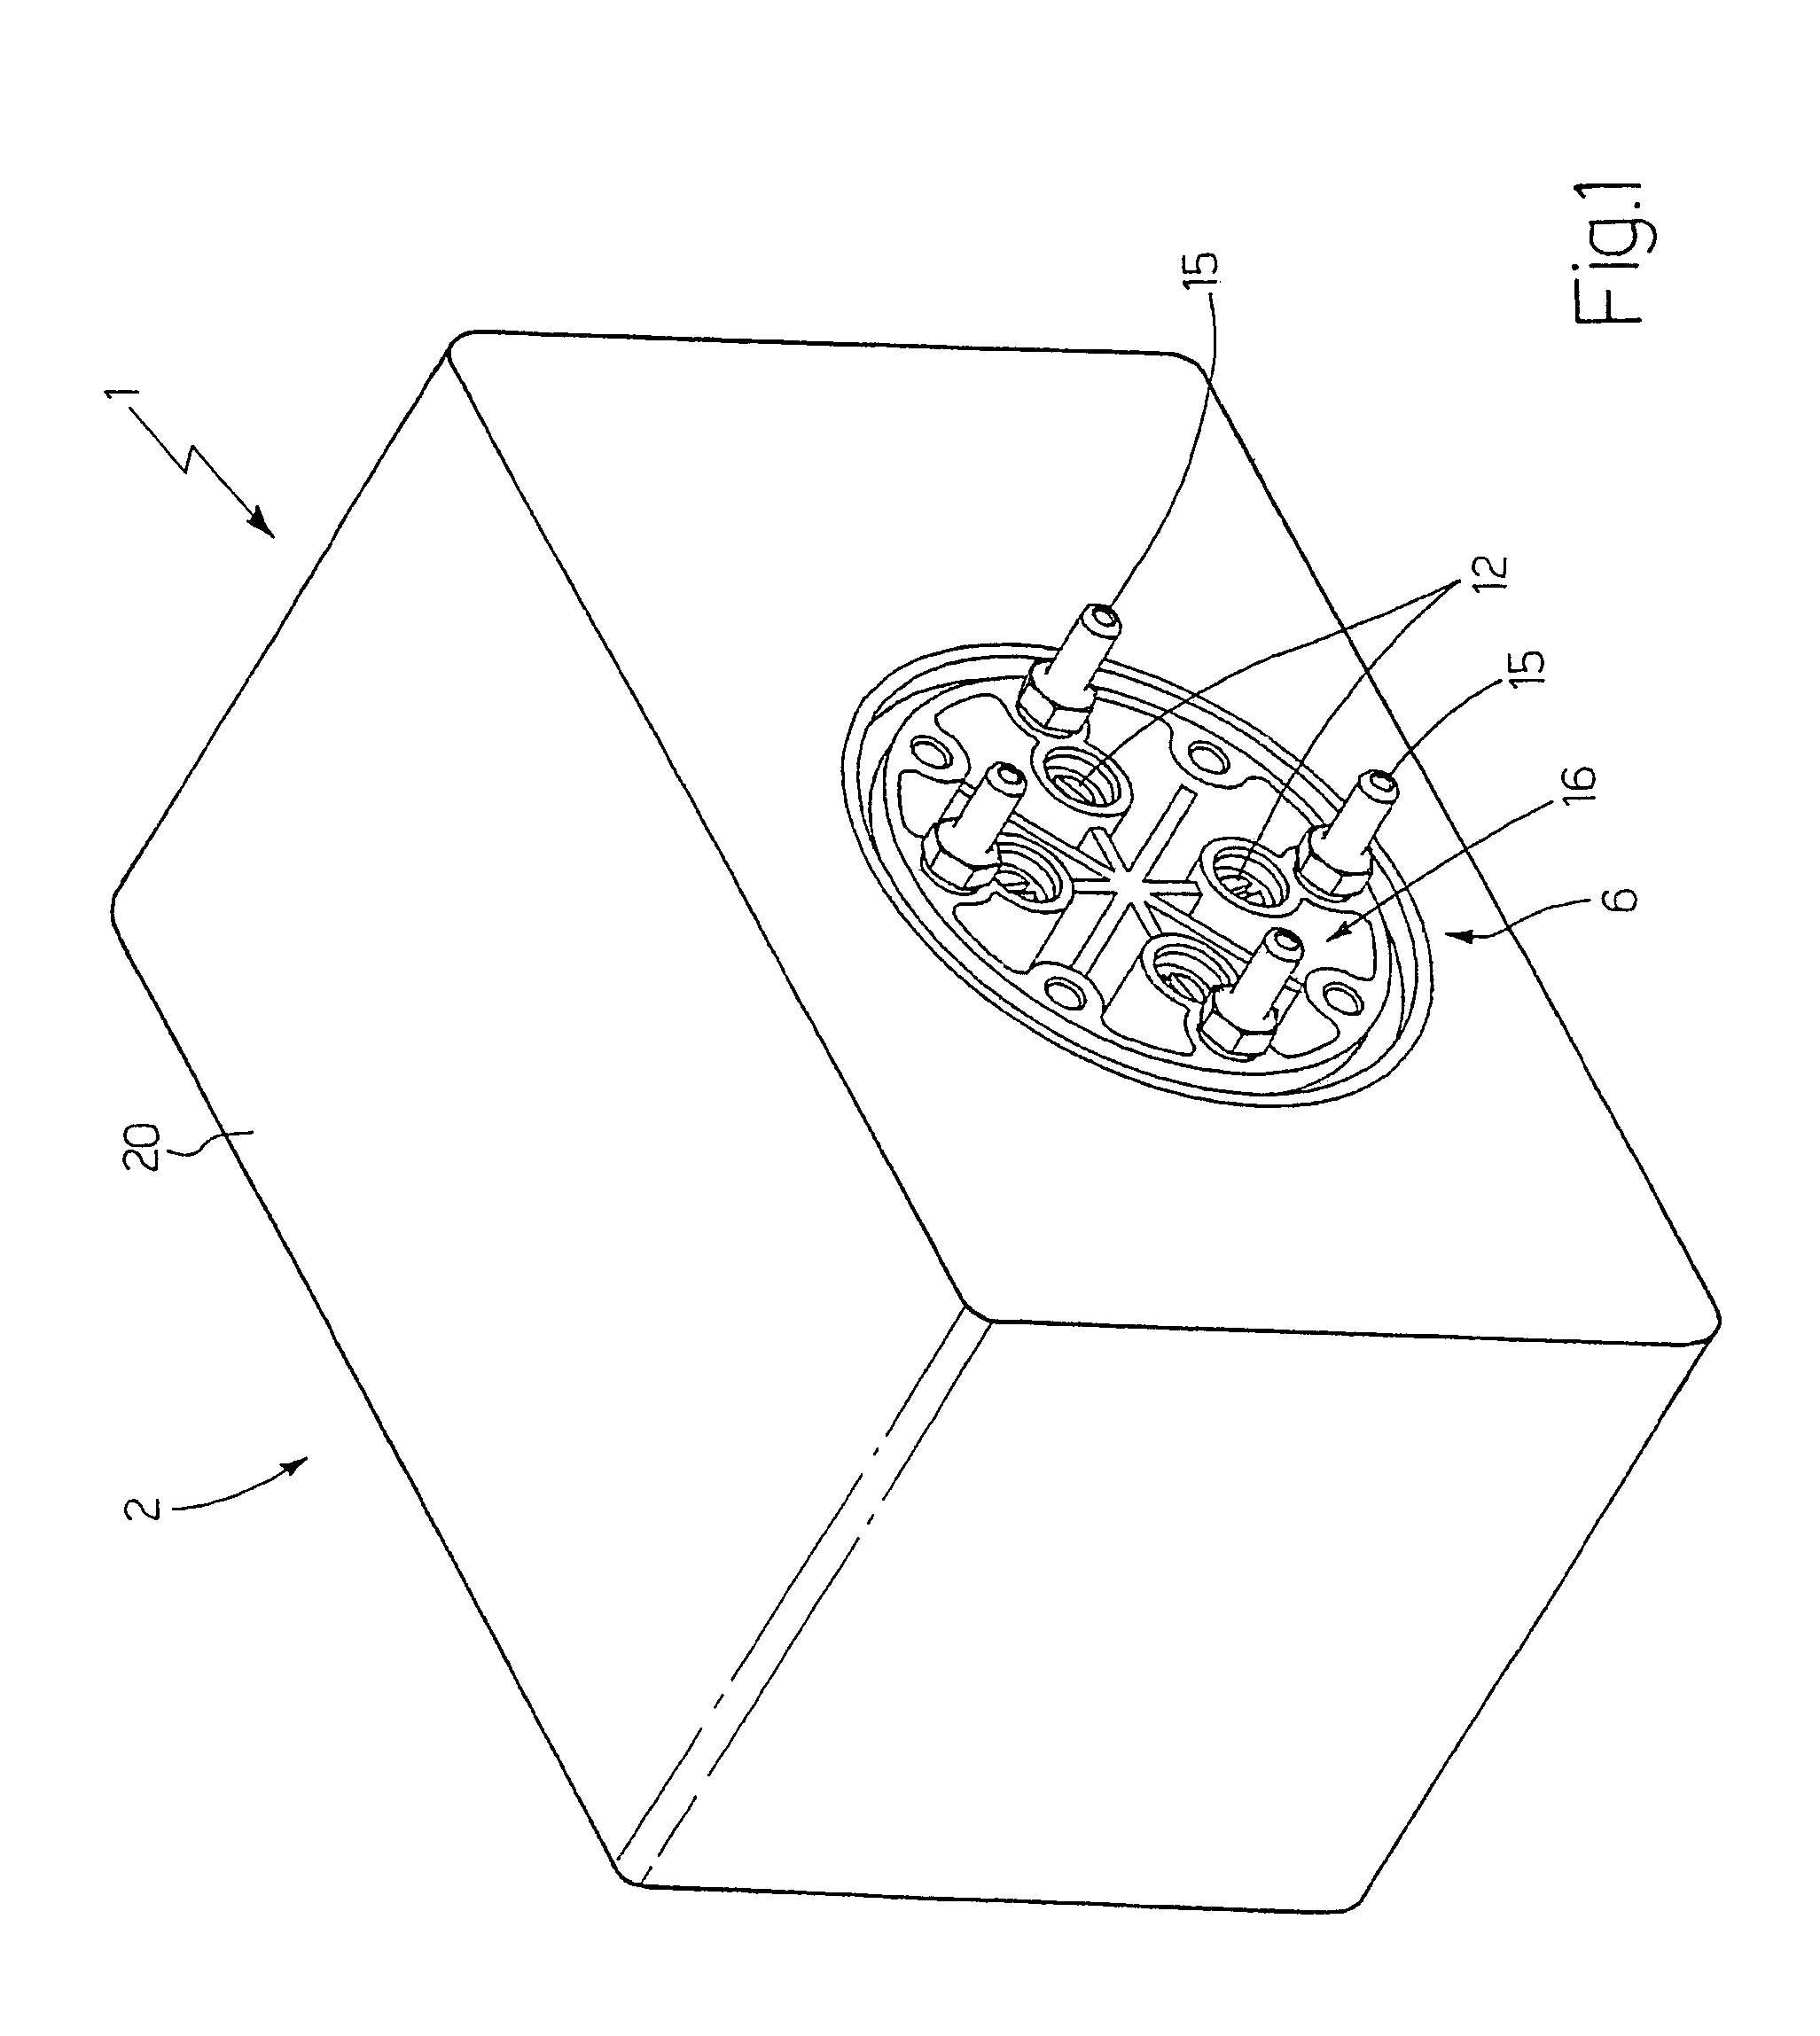 Air supply unit for an internal combustion engine